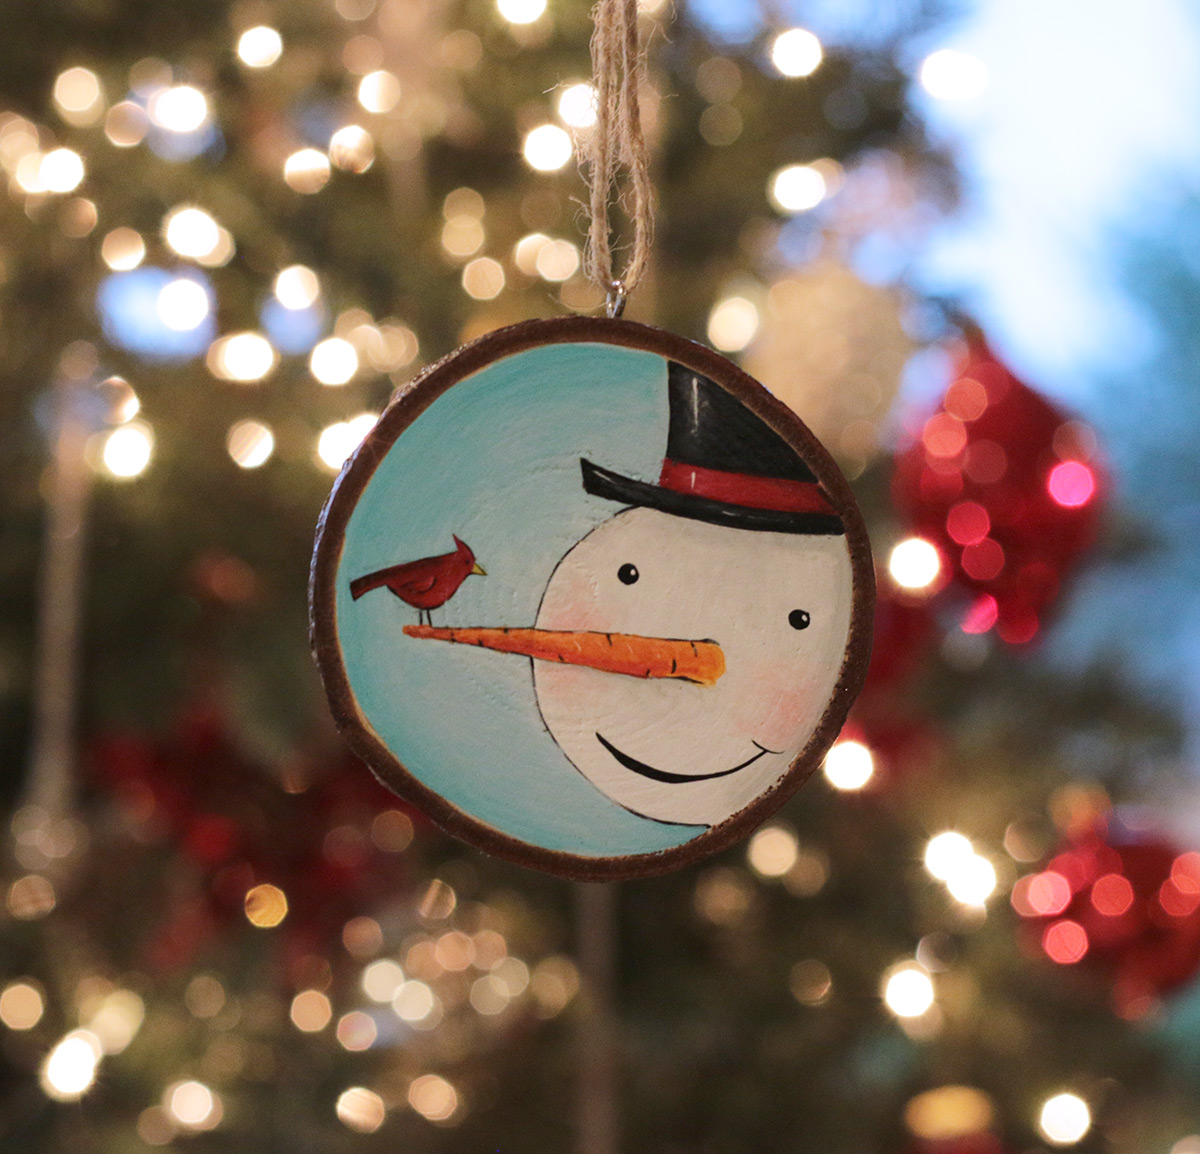 Snowman and Cardinals with Birch Wood Christmas Ornament Tree Decoration 